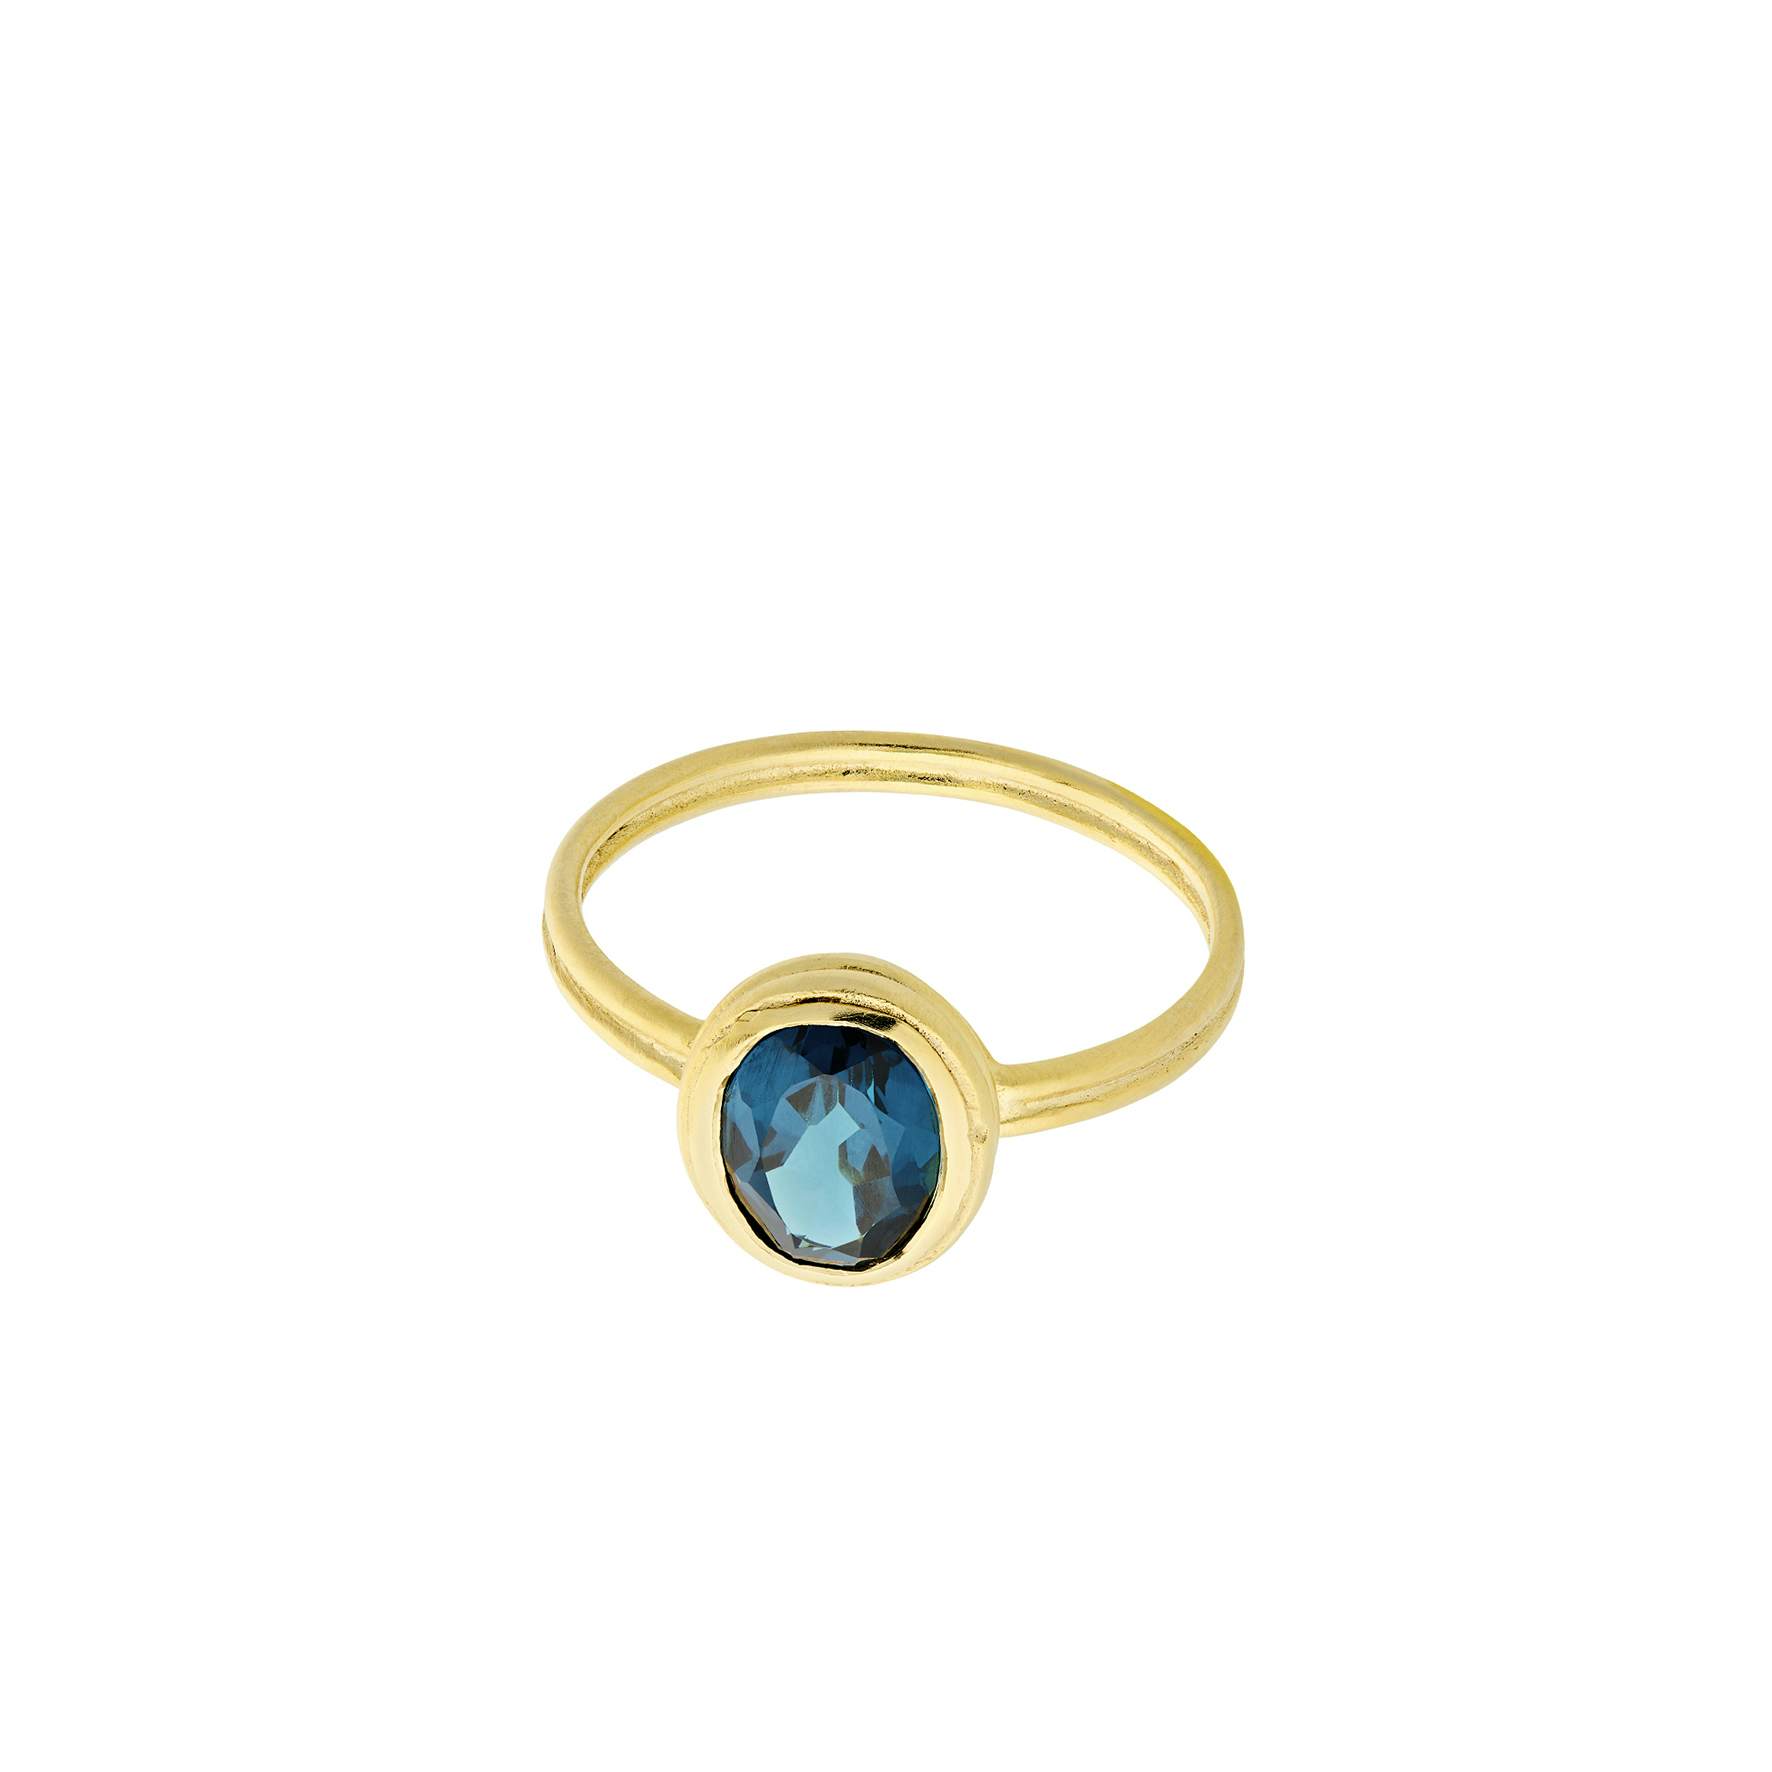 Hellir Blue Ice Ring from Pernille Corydon in Goldplated-Silver Sterling 925|